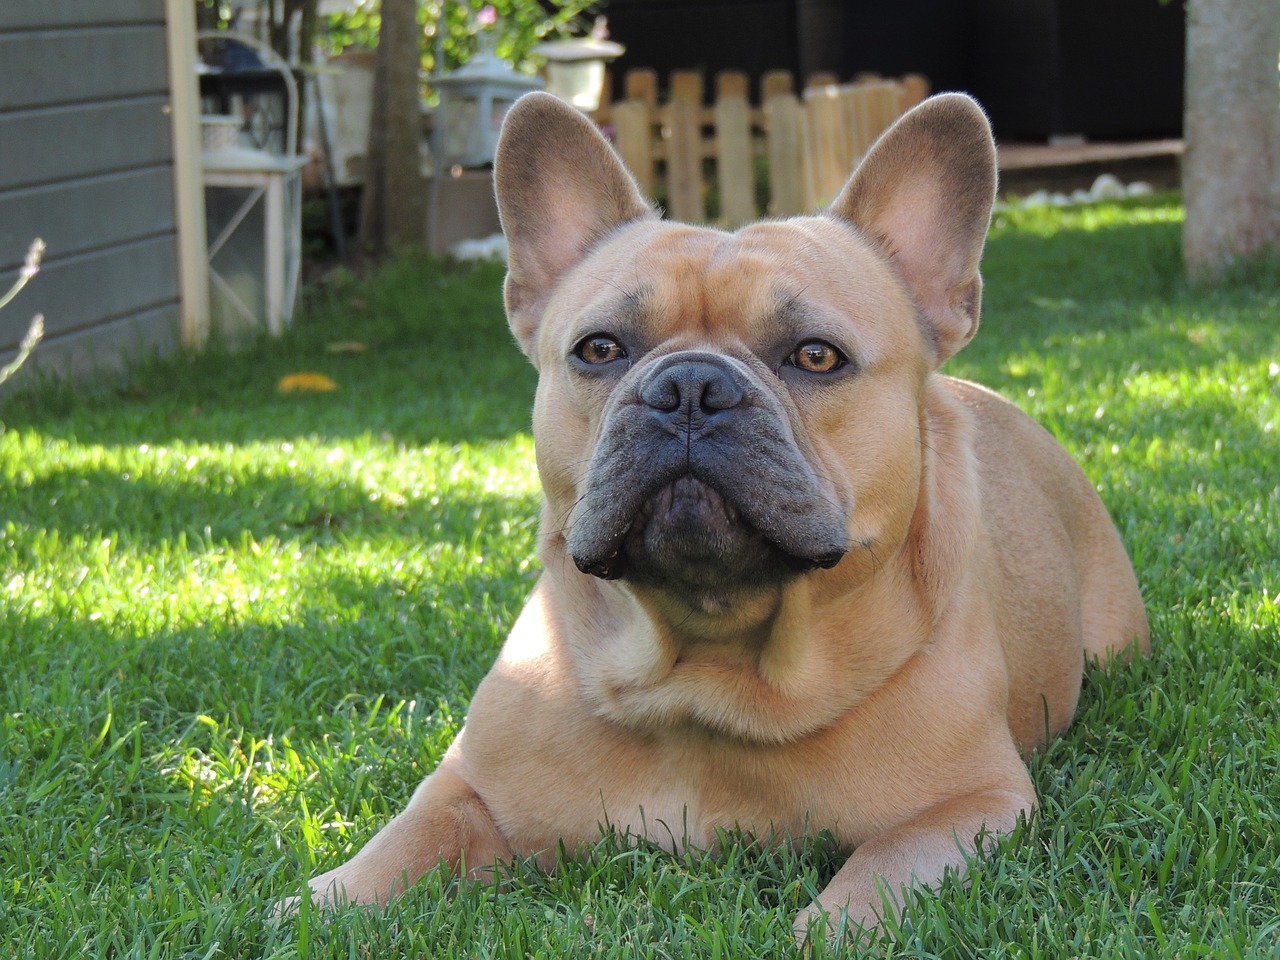 a dog that is laying in the grass, renaissance, french bulldog, tanned skintone, wrinkles and muscles, is a stunning